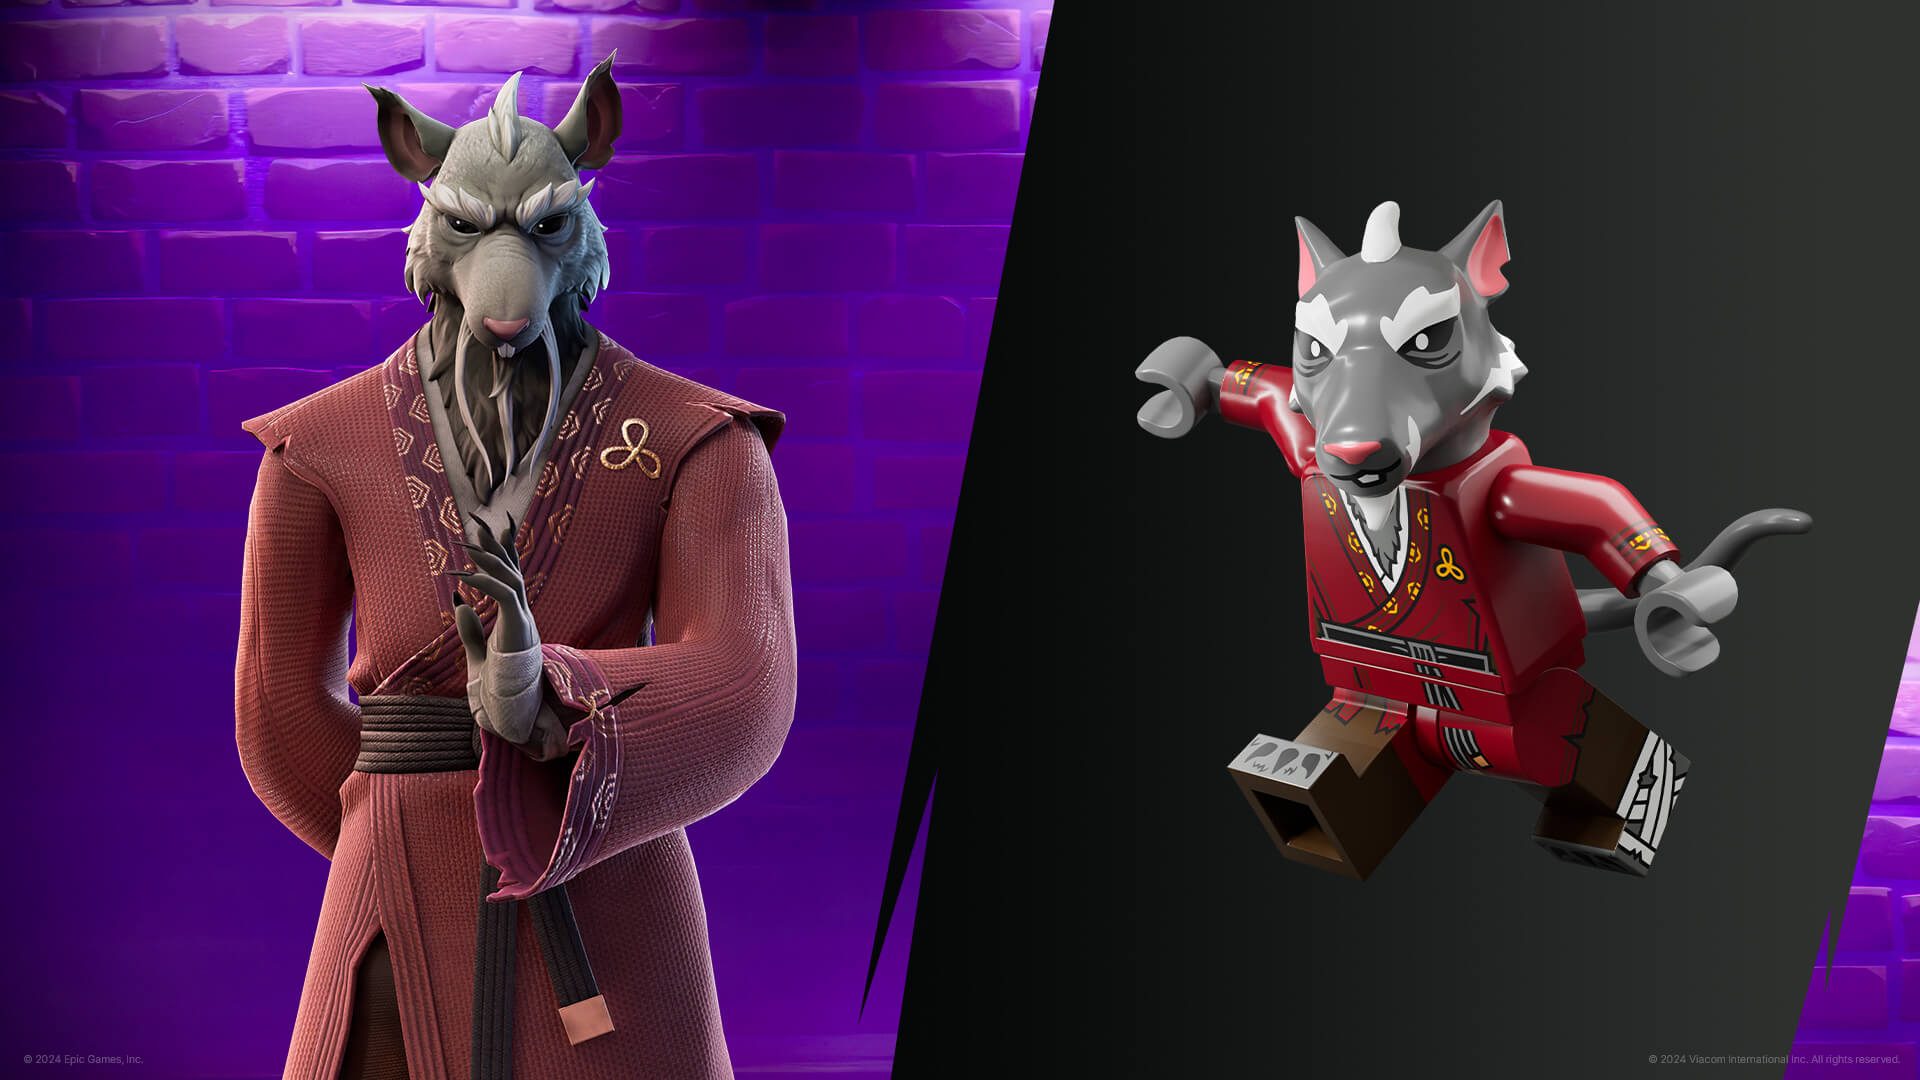 A Fortnite and Lego Fortnite version of Splinter, a rat wearing red robes